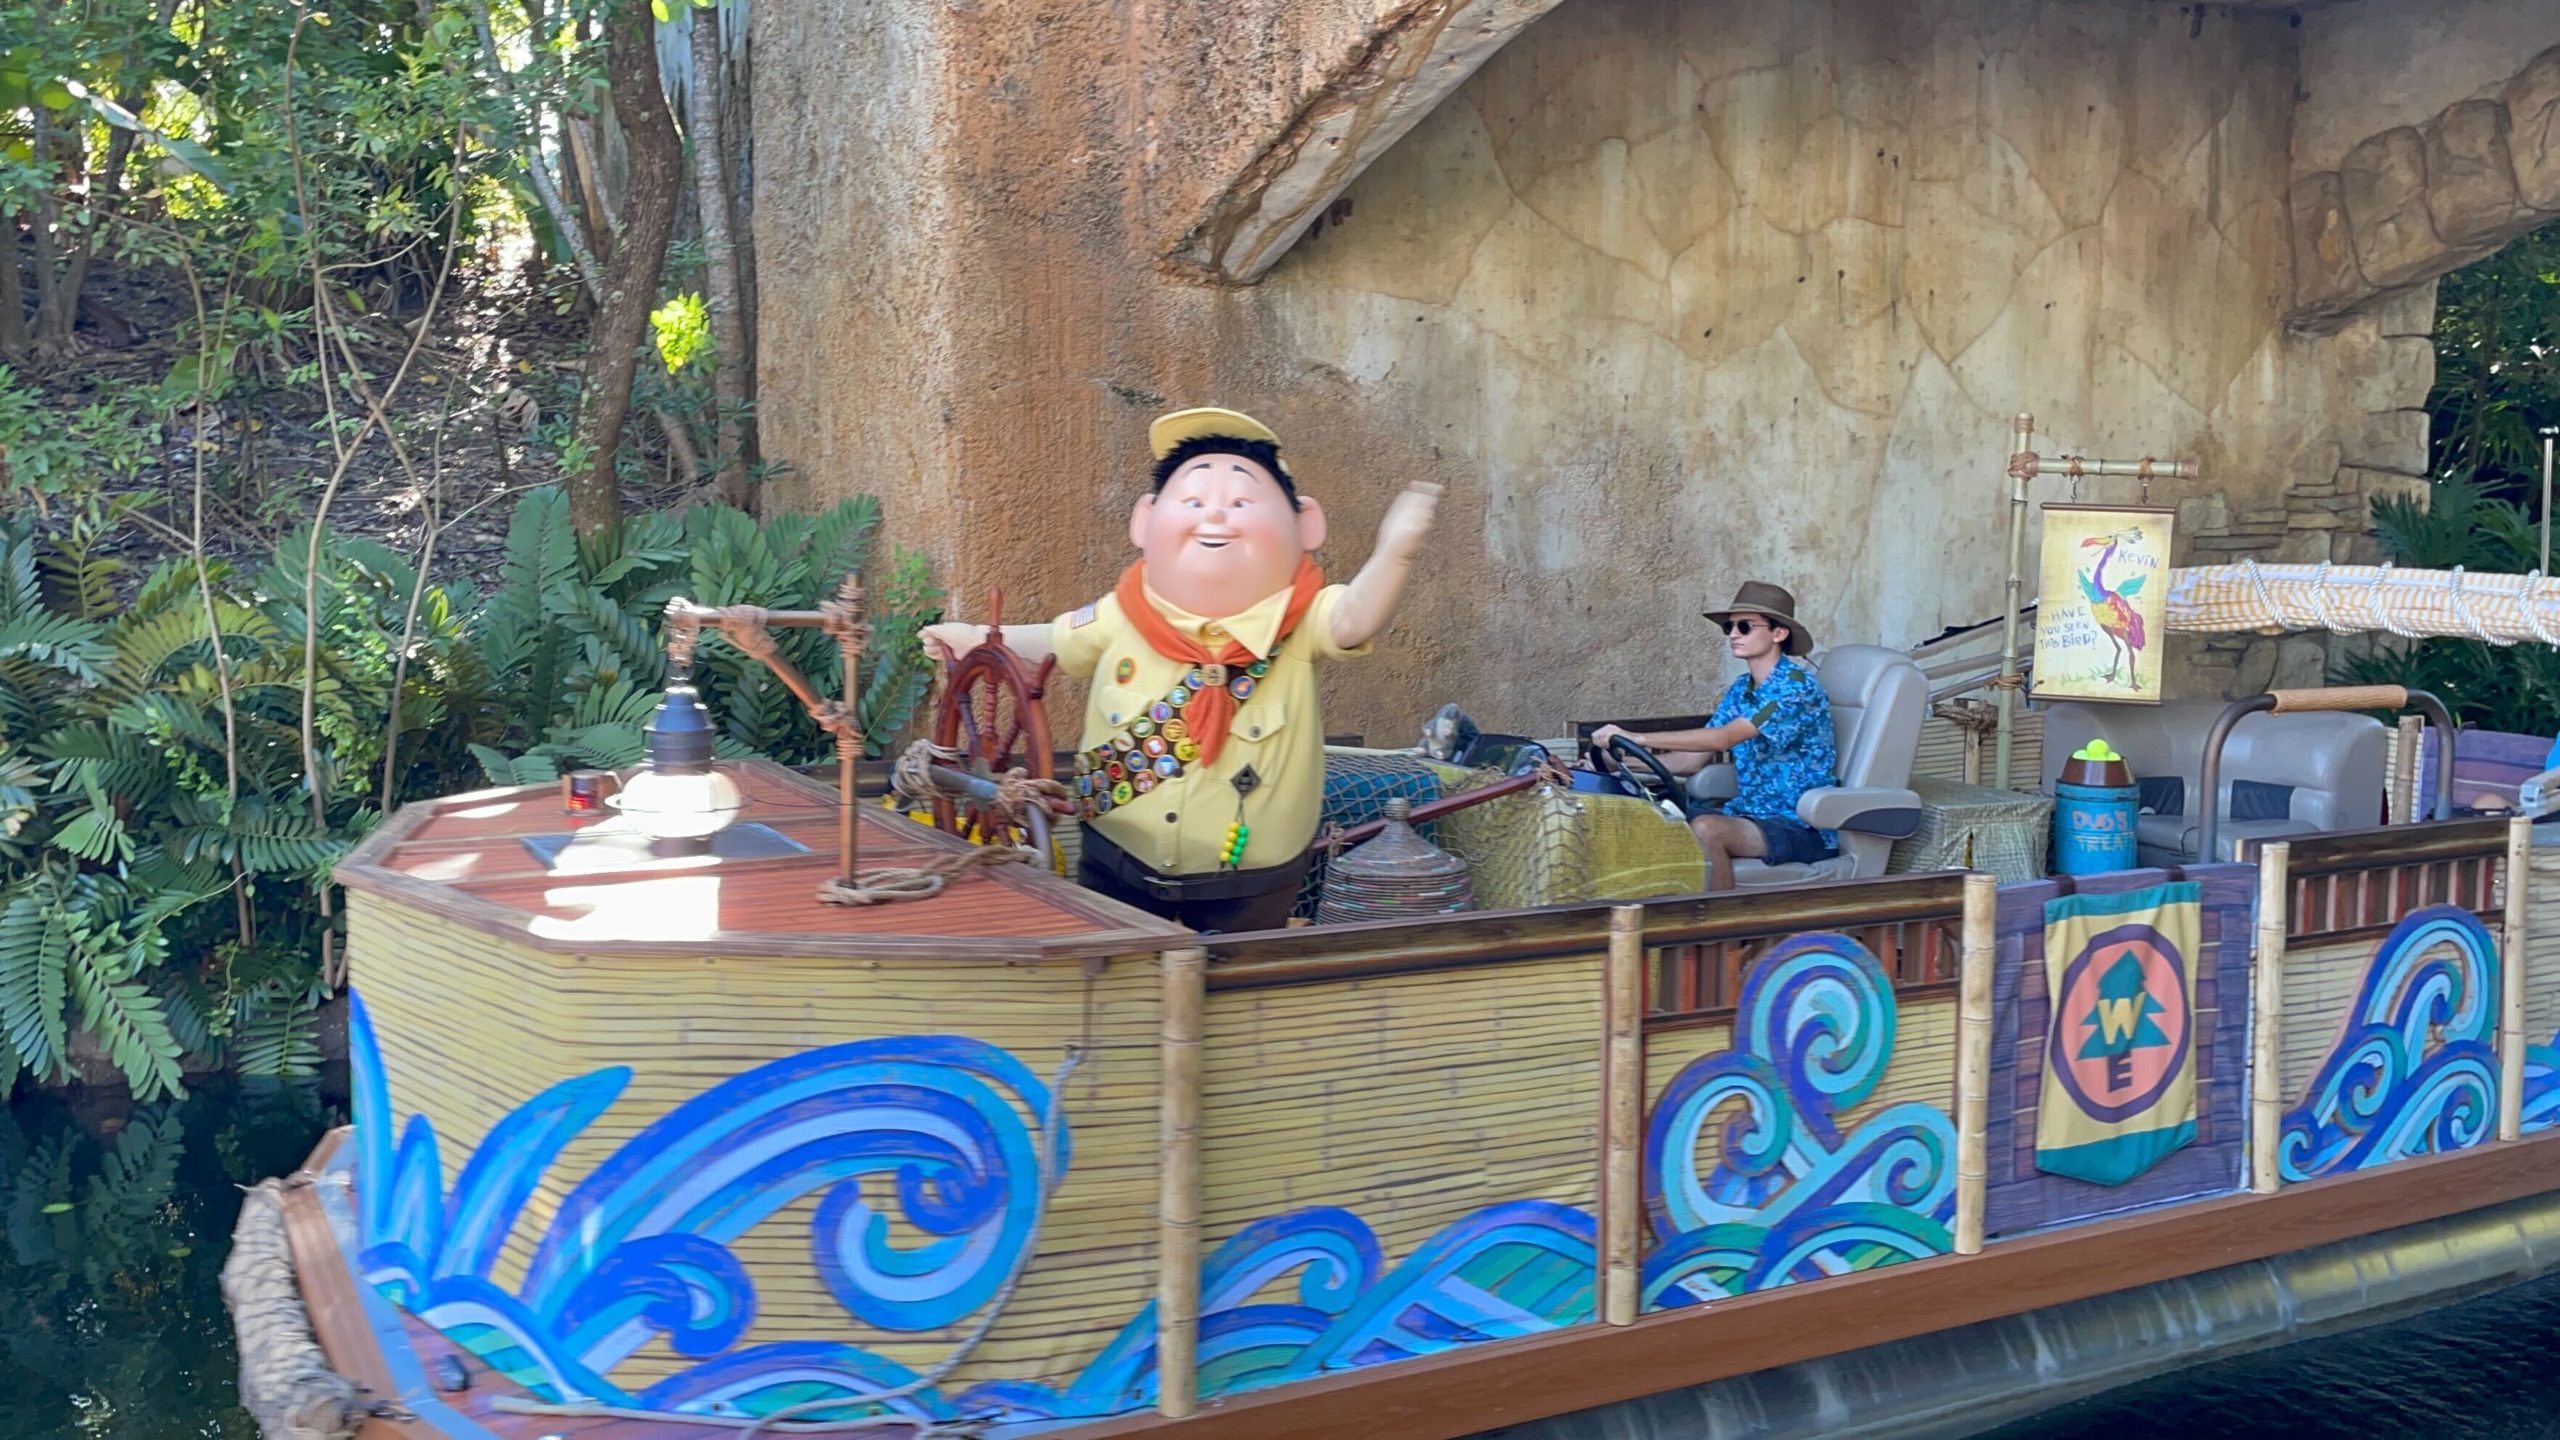 Russell from "Up" on Adventure Flotilla